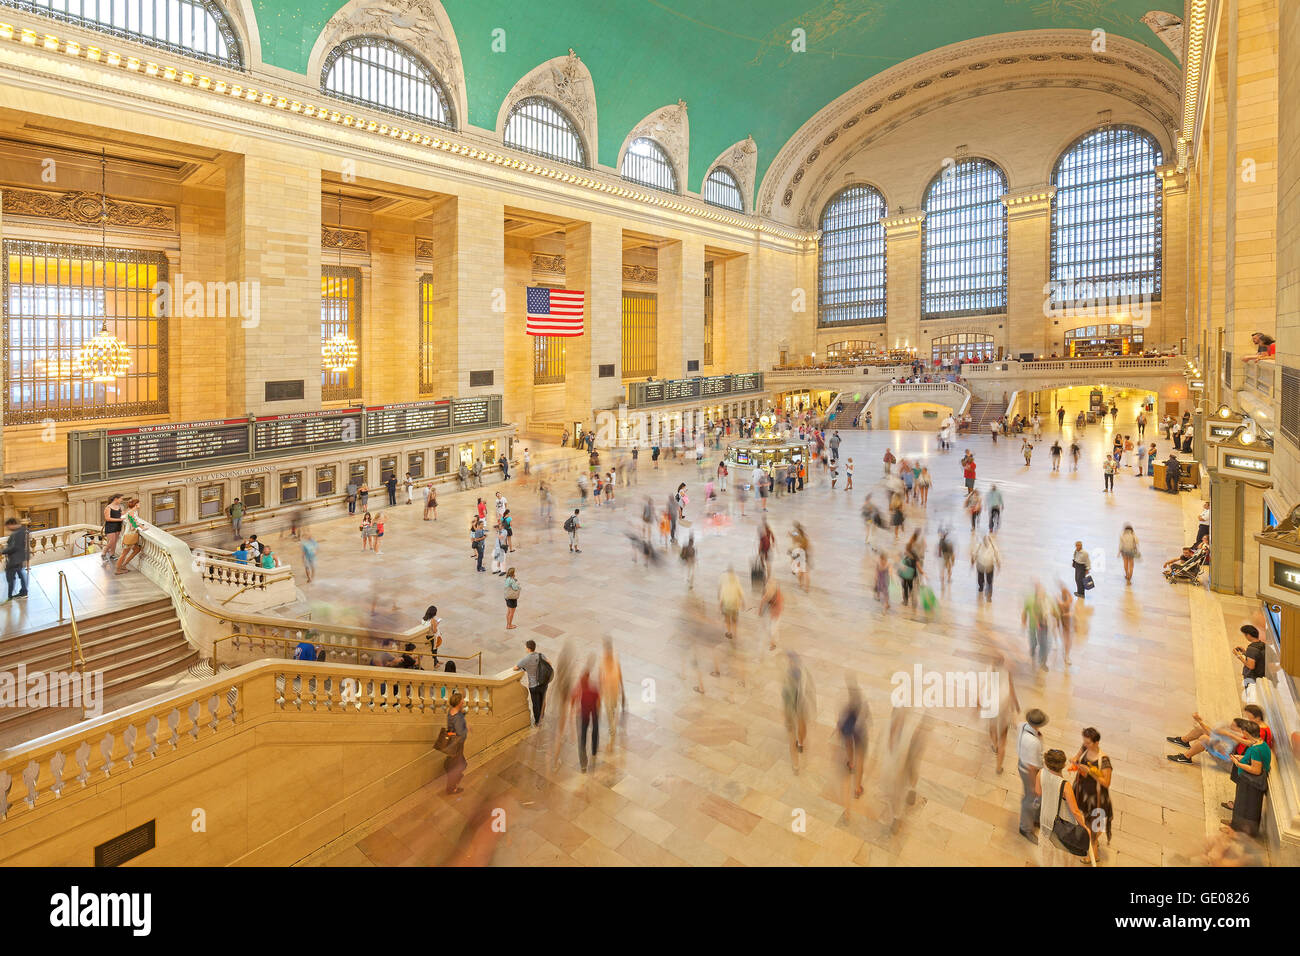 New York, USA - August 15, 2015: Commuters in the Grand Central Terminal main hall during busy day. Stock Photo